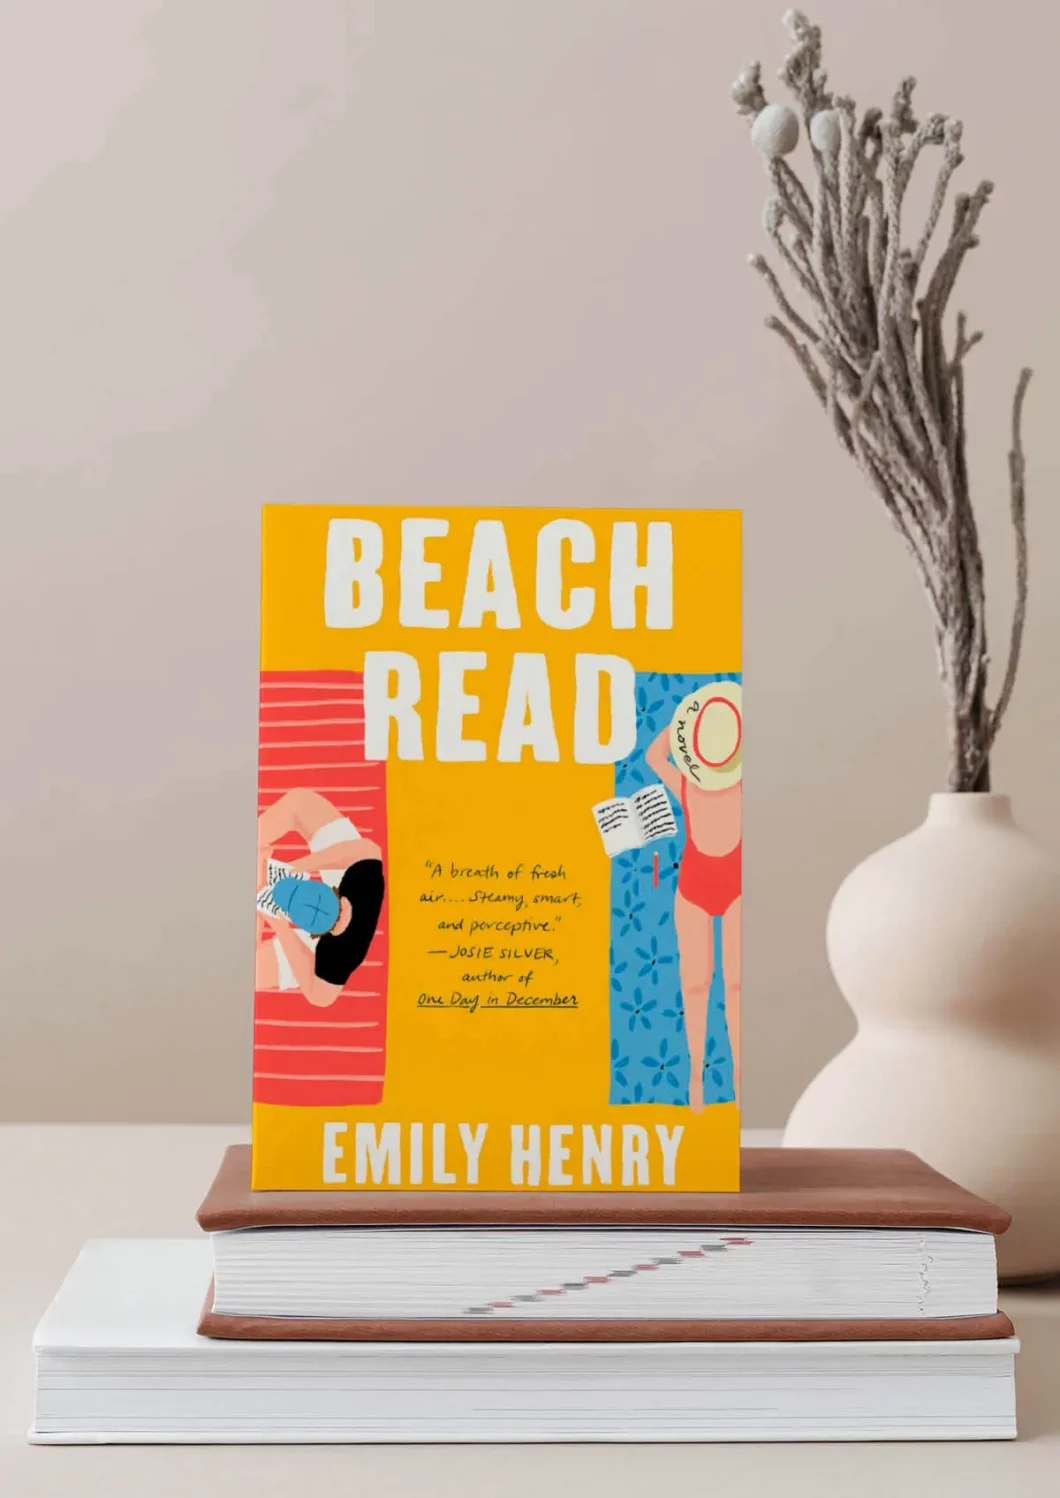 Beach Read by Emily Henry-a Perfect Romance Fiction for This Season